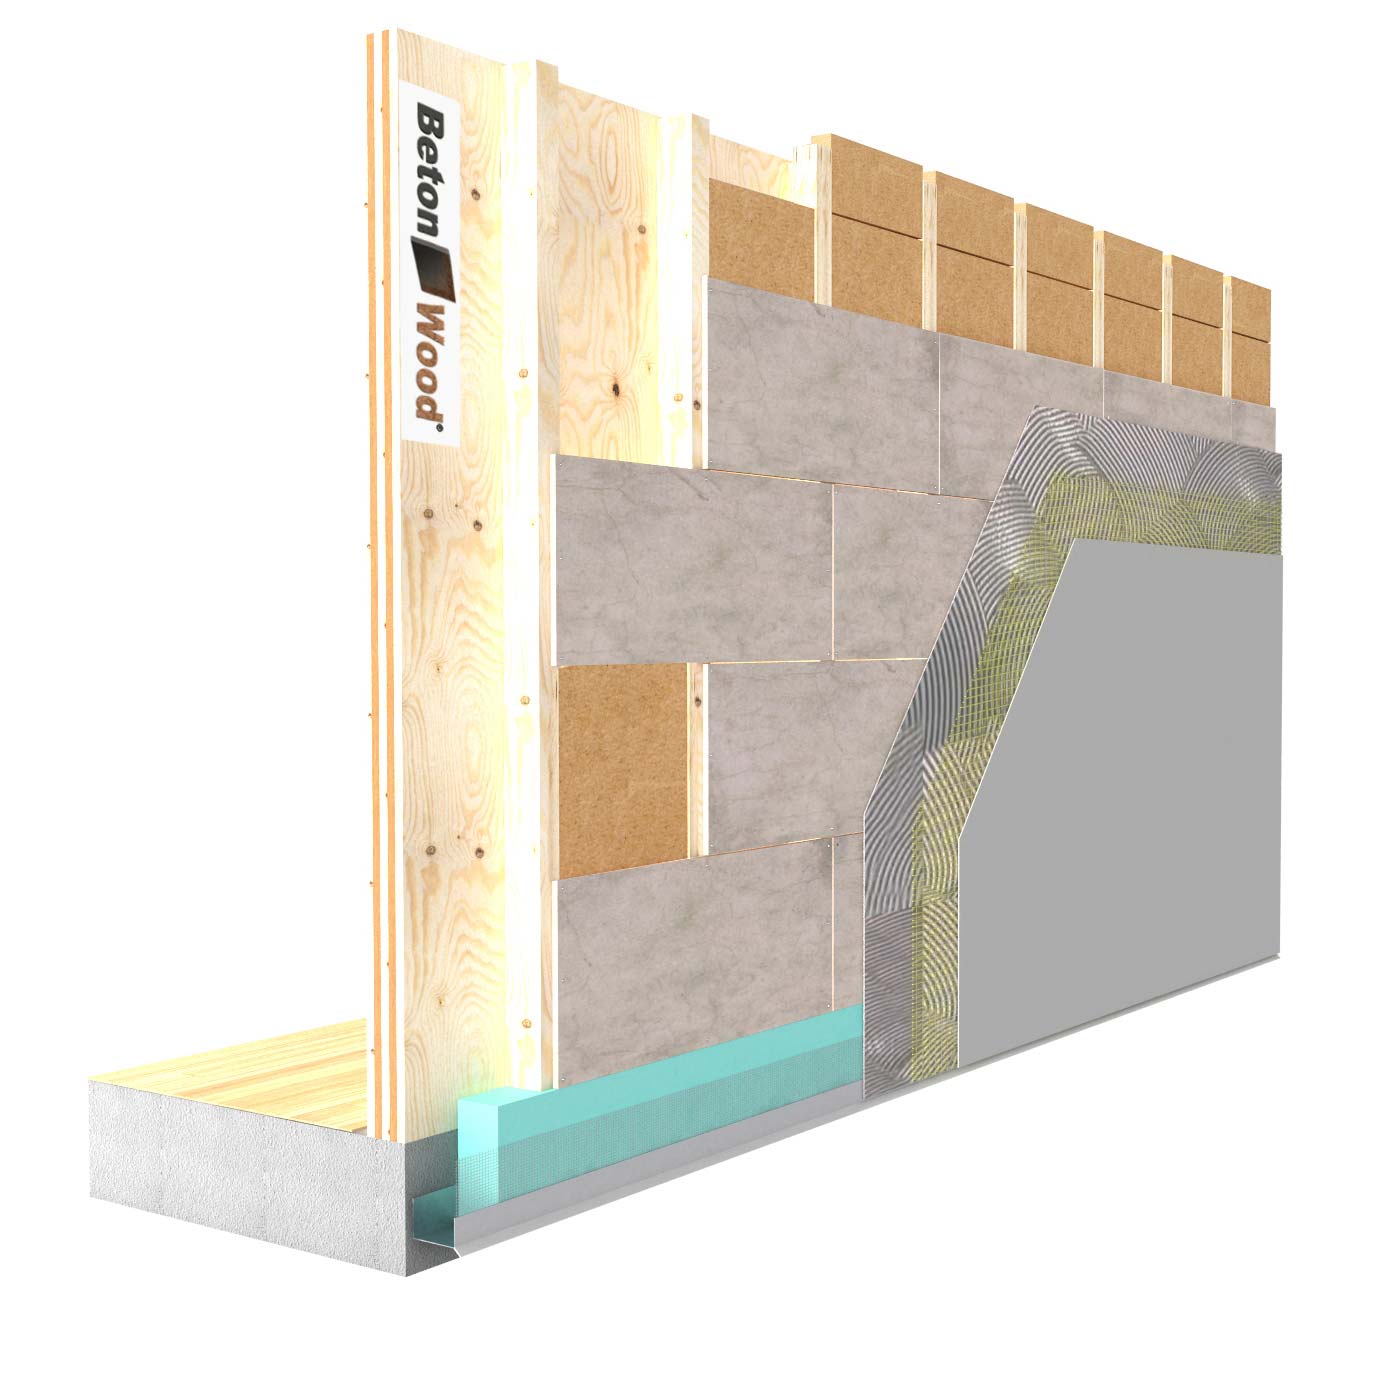 External insulation system with Fiber Wood FiberTherm dry and cement bonded particle board on X-Lam